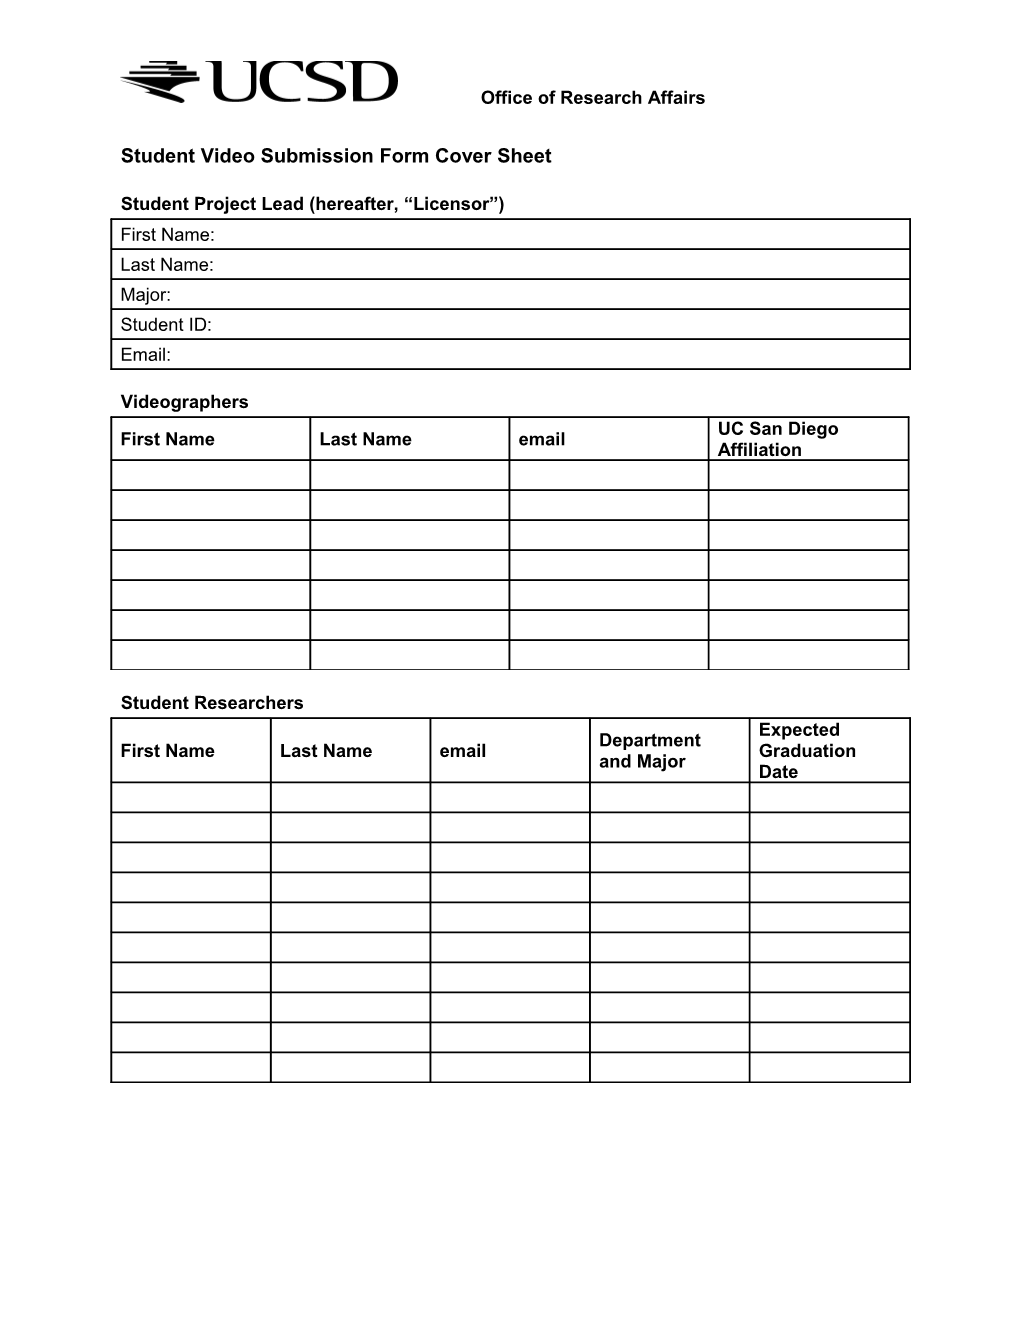 Student Video Submission Form Cover Sheet